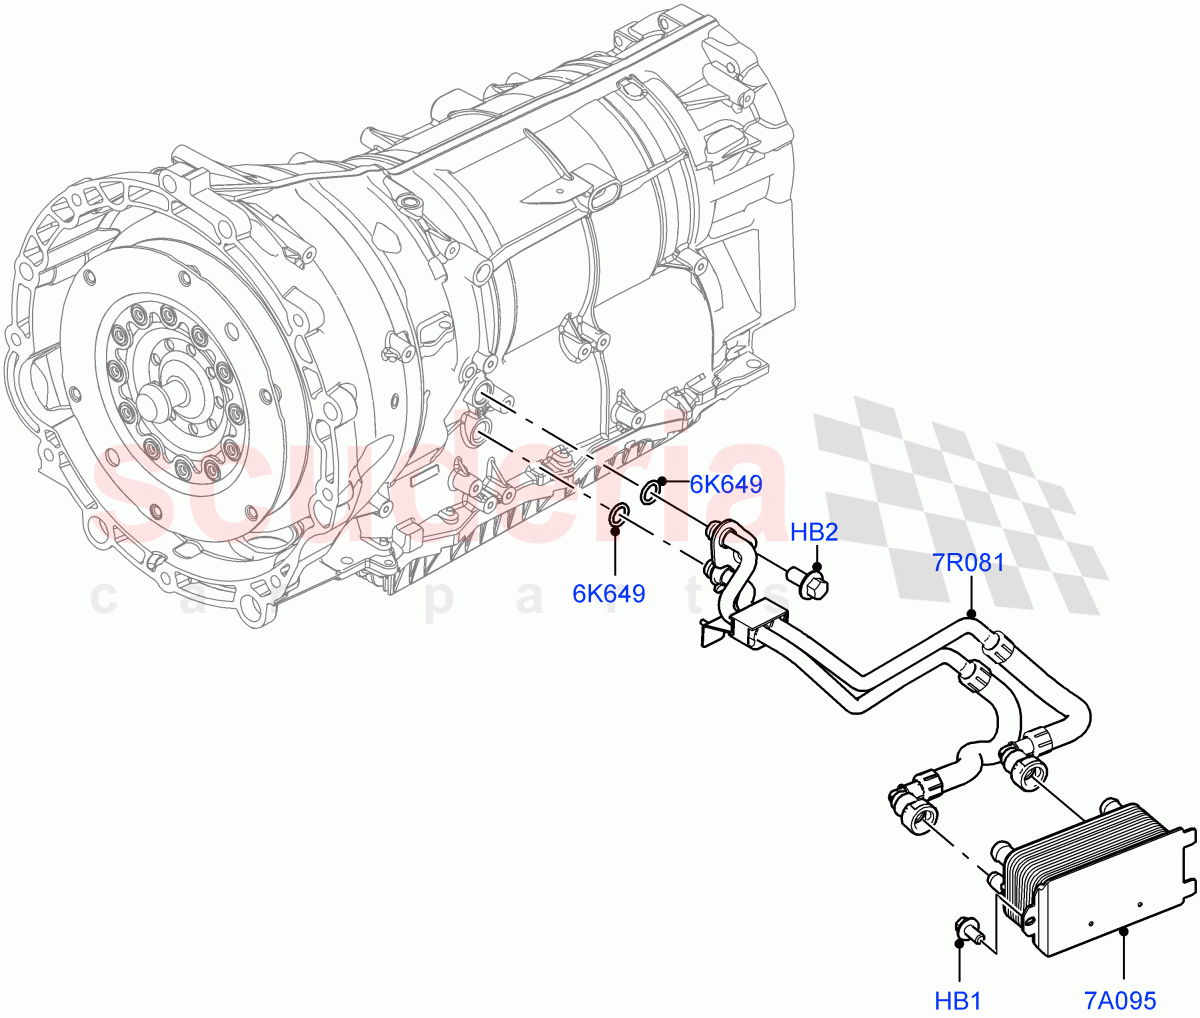 Transmission Cooling Systems(3.0L AJ20P6 Petrol High,8 Speed Auto Trans ZF 8HP76,3.0L AJ20D6 Diesel High)((V)FROMKA000001) of Land Rover Land Rover Range Rover (2012-2021) [3.0 I6 Turbo Diesel AJ20D6]